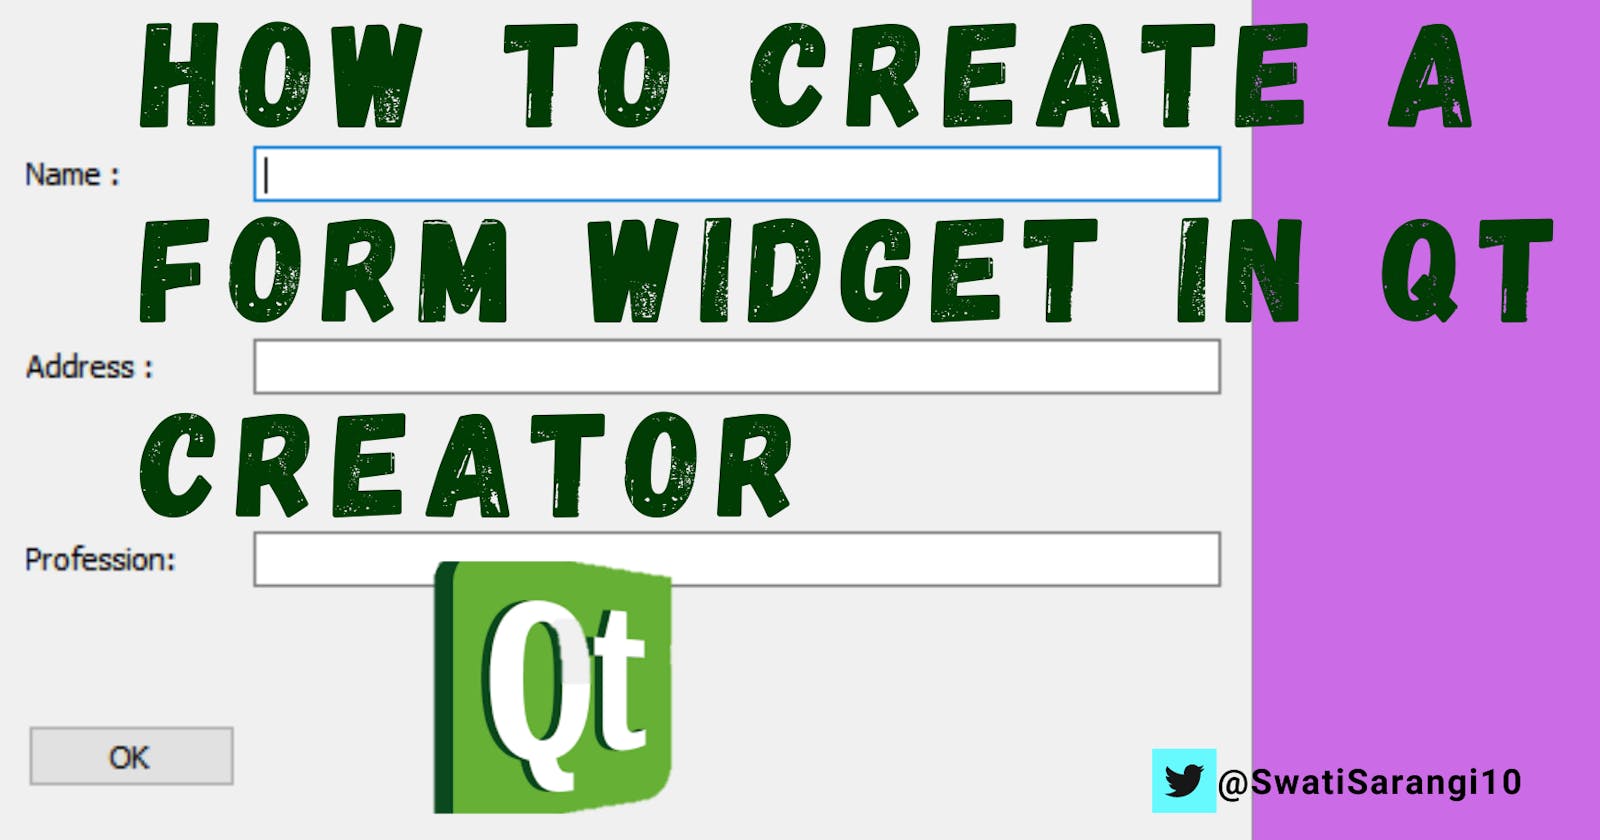 How to create a form widget in QtCreator for entering personal details